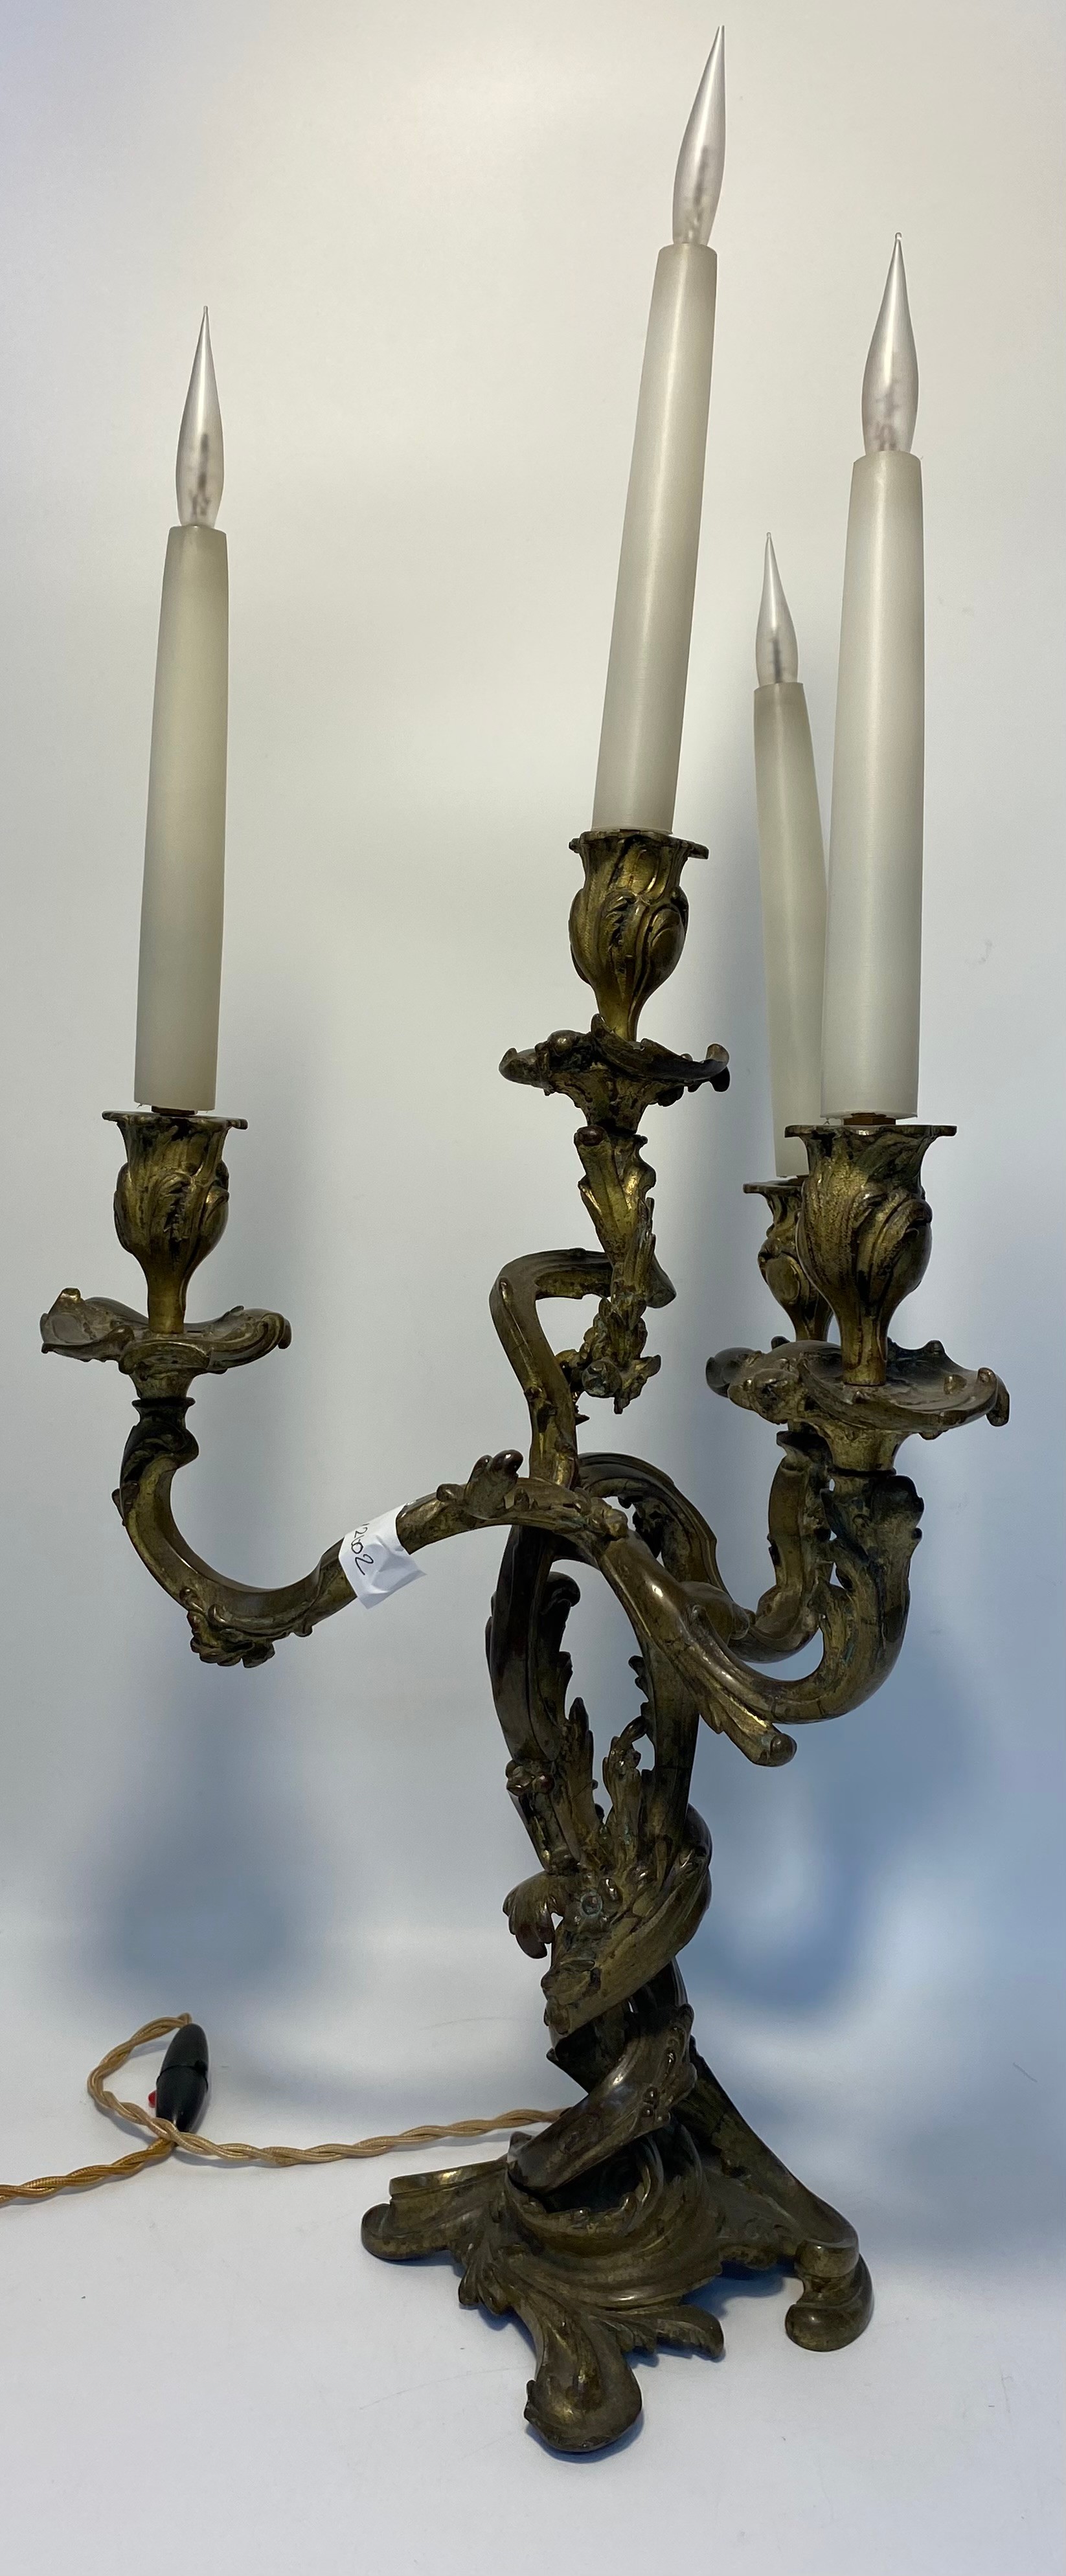 19th century 4 branch candelabra [converted to electric] [47.5cm]